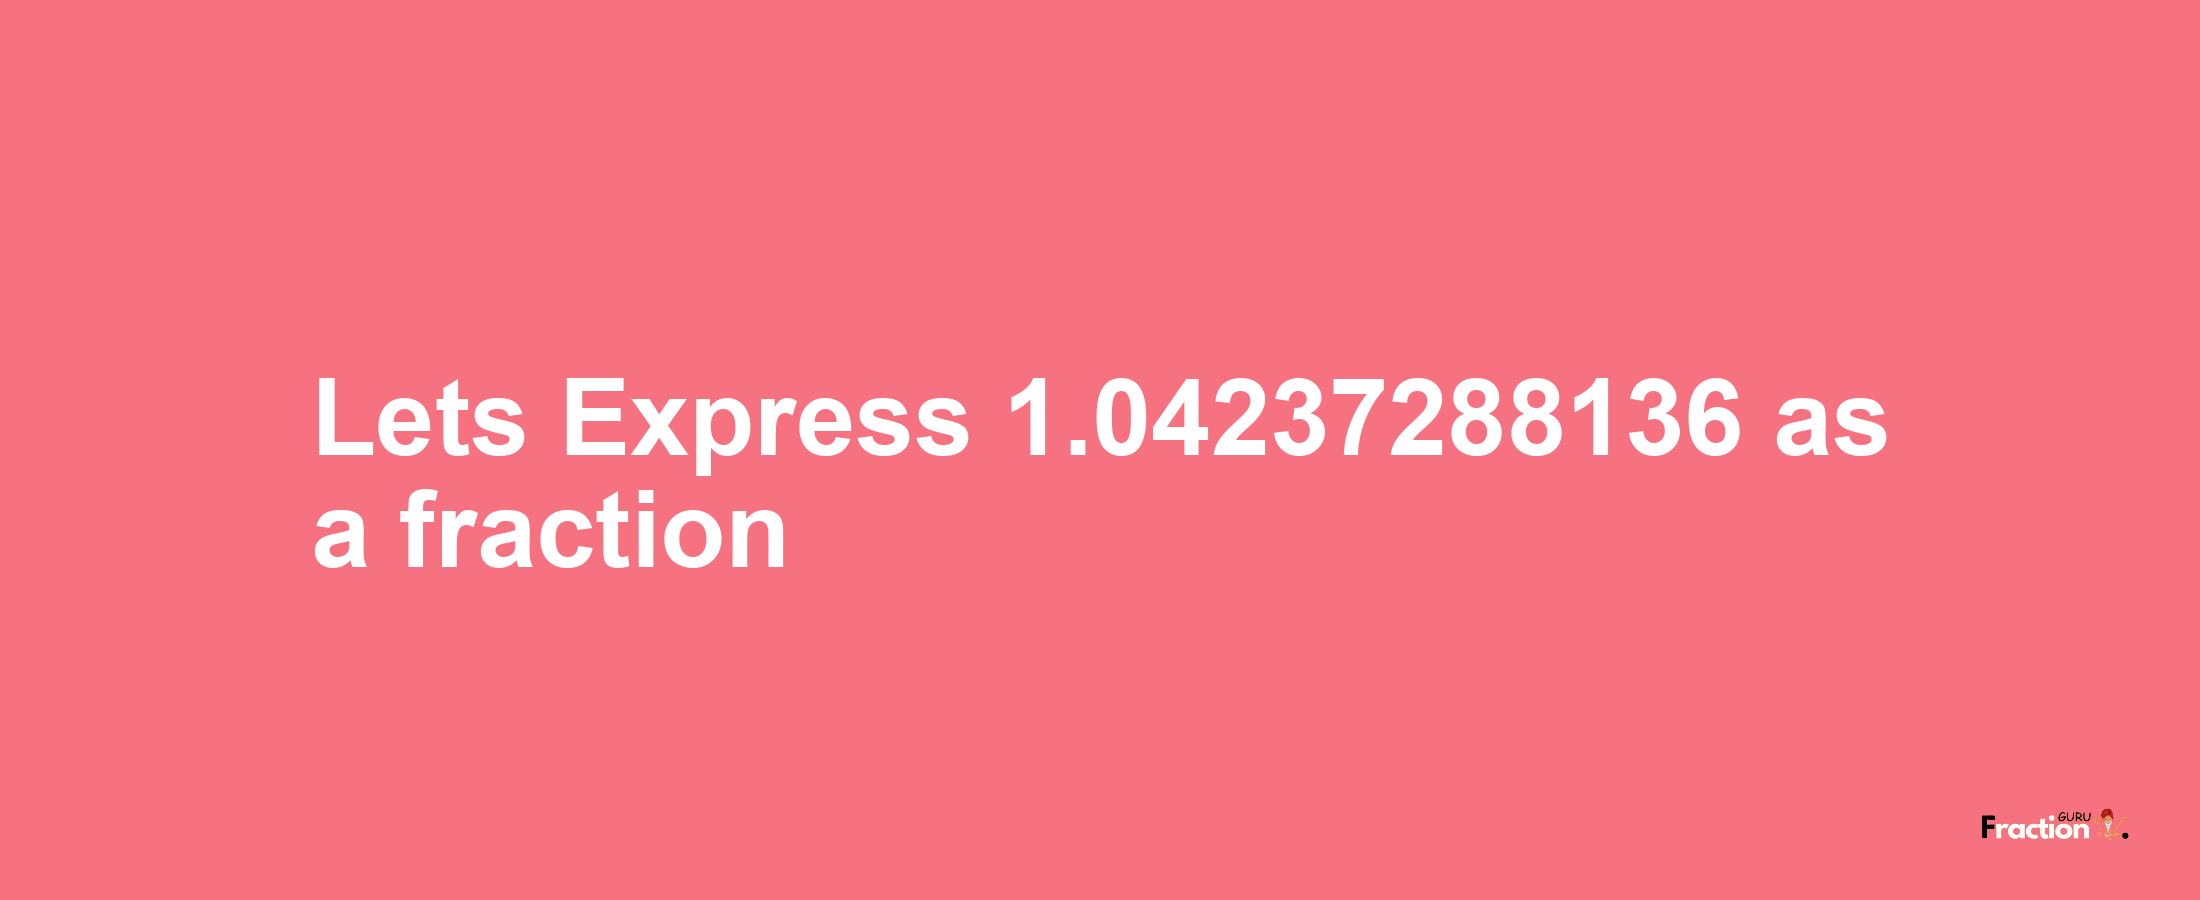 Lets Express 1.04237288136 as afraction